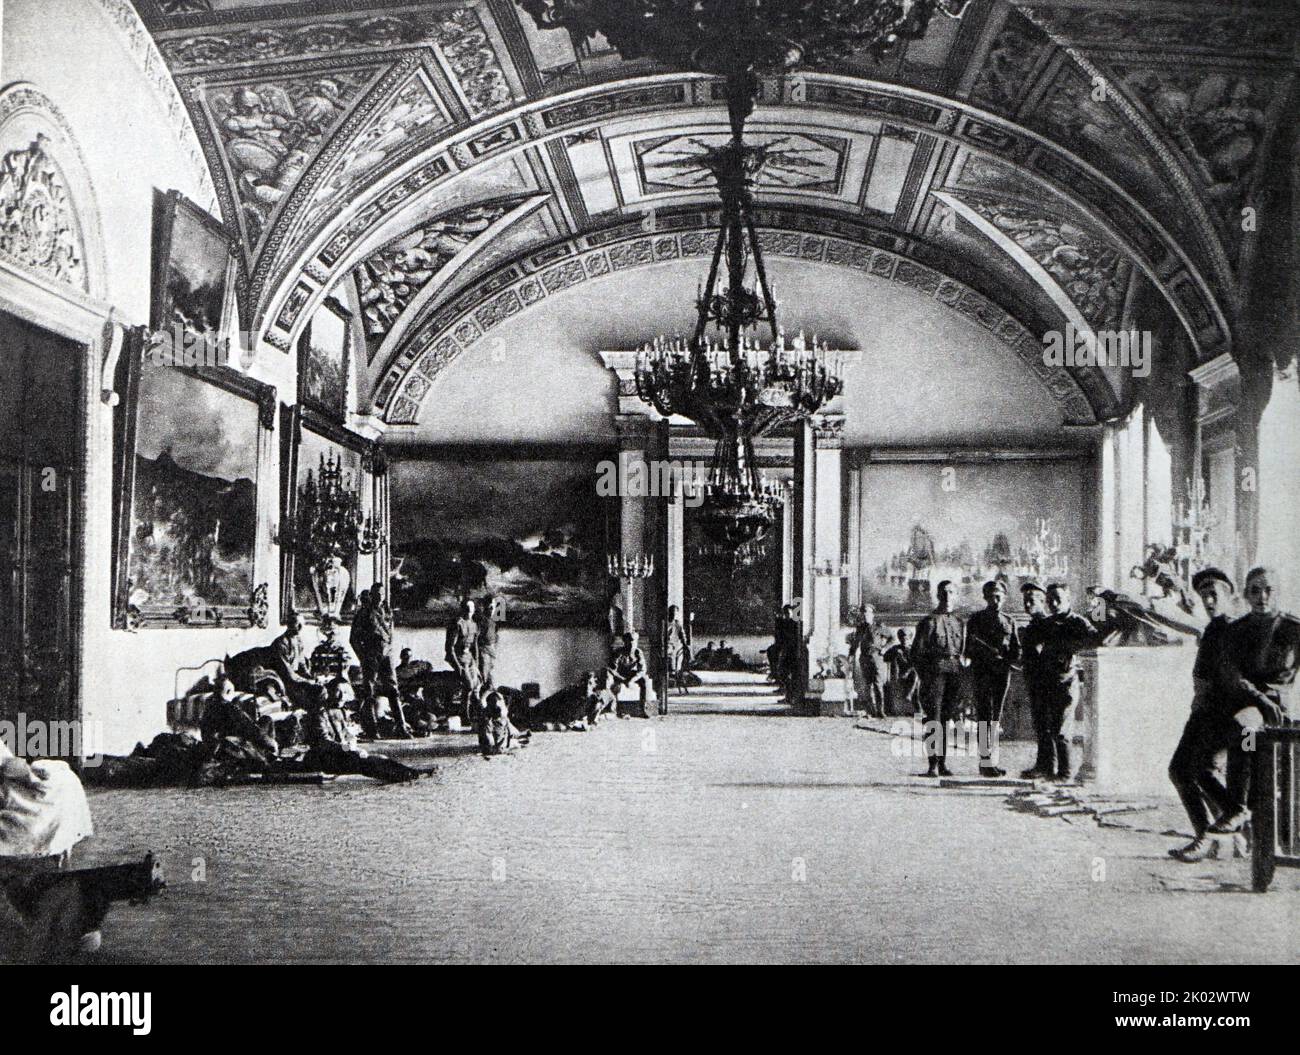 A detachment of junkers in the halls of the Winter Palace. October 1917. Photo by K. Kubesh. Stock Photo